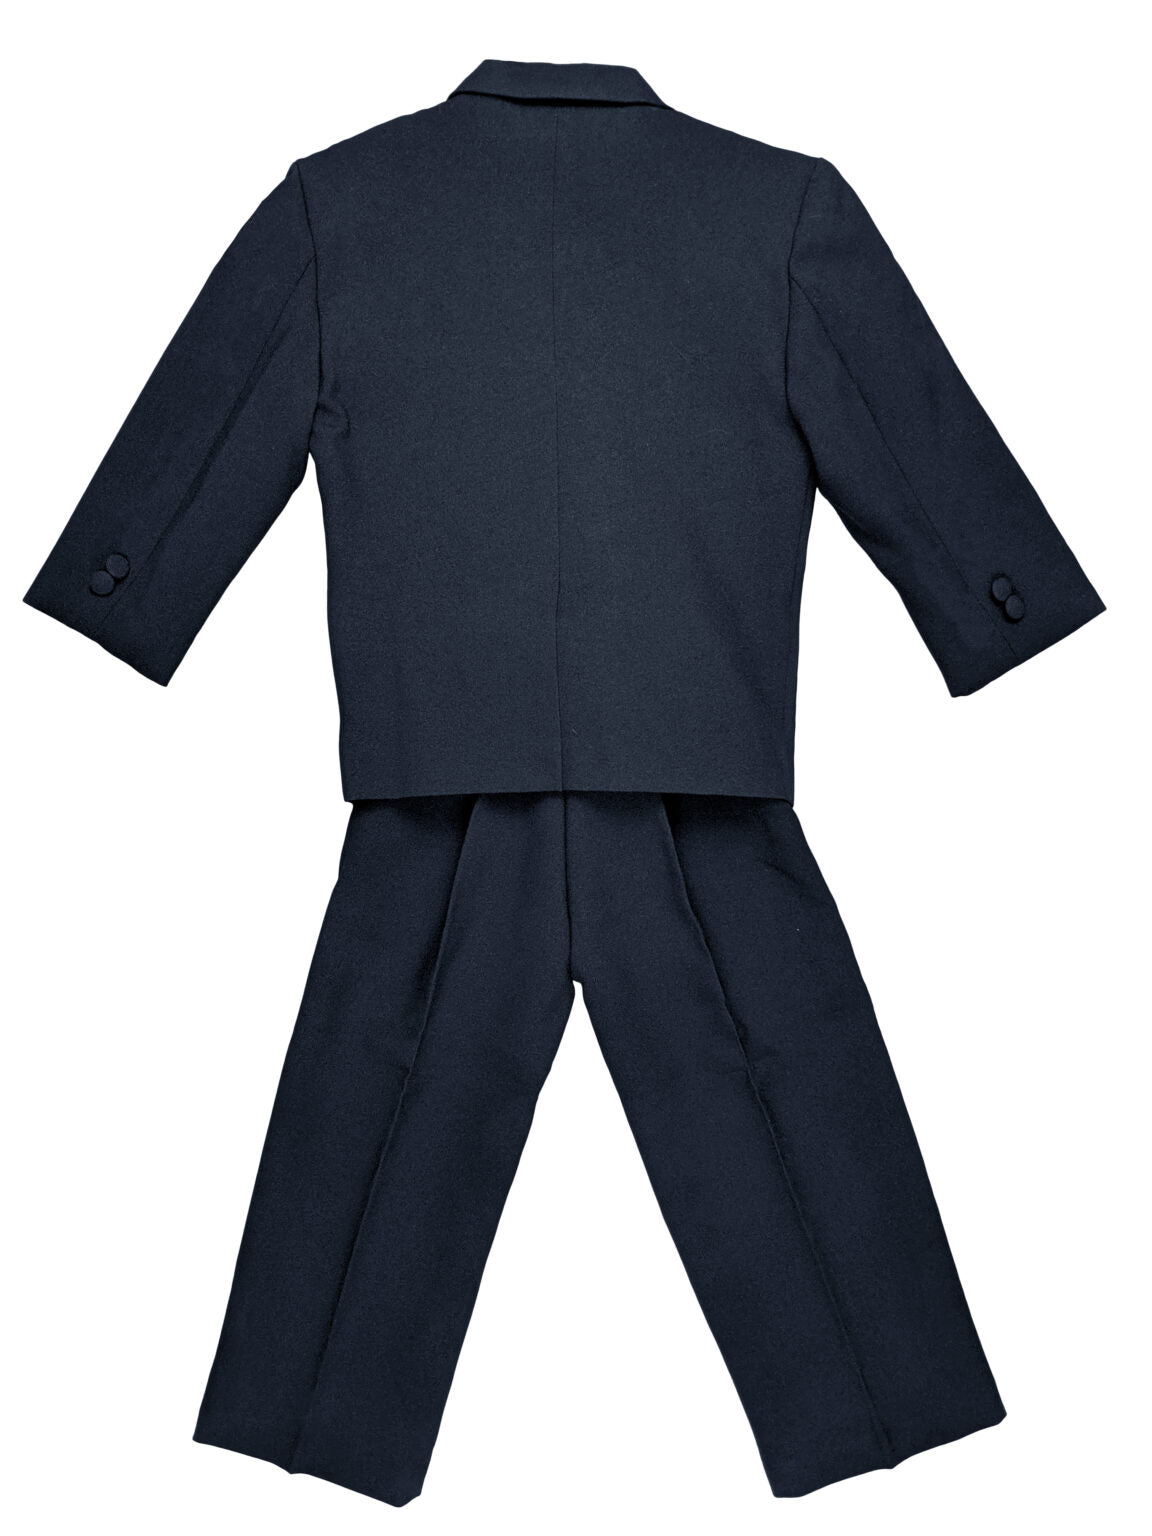 Boys Formal 5 Piece Suit with Shirt and Vest – Navy Blue - AH-BY013